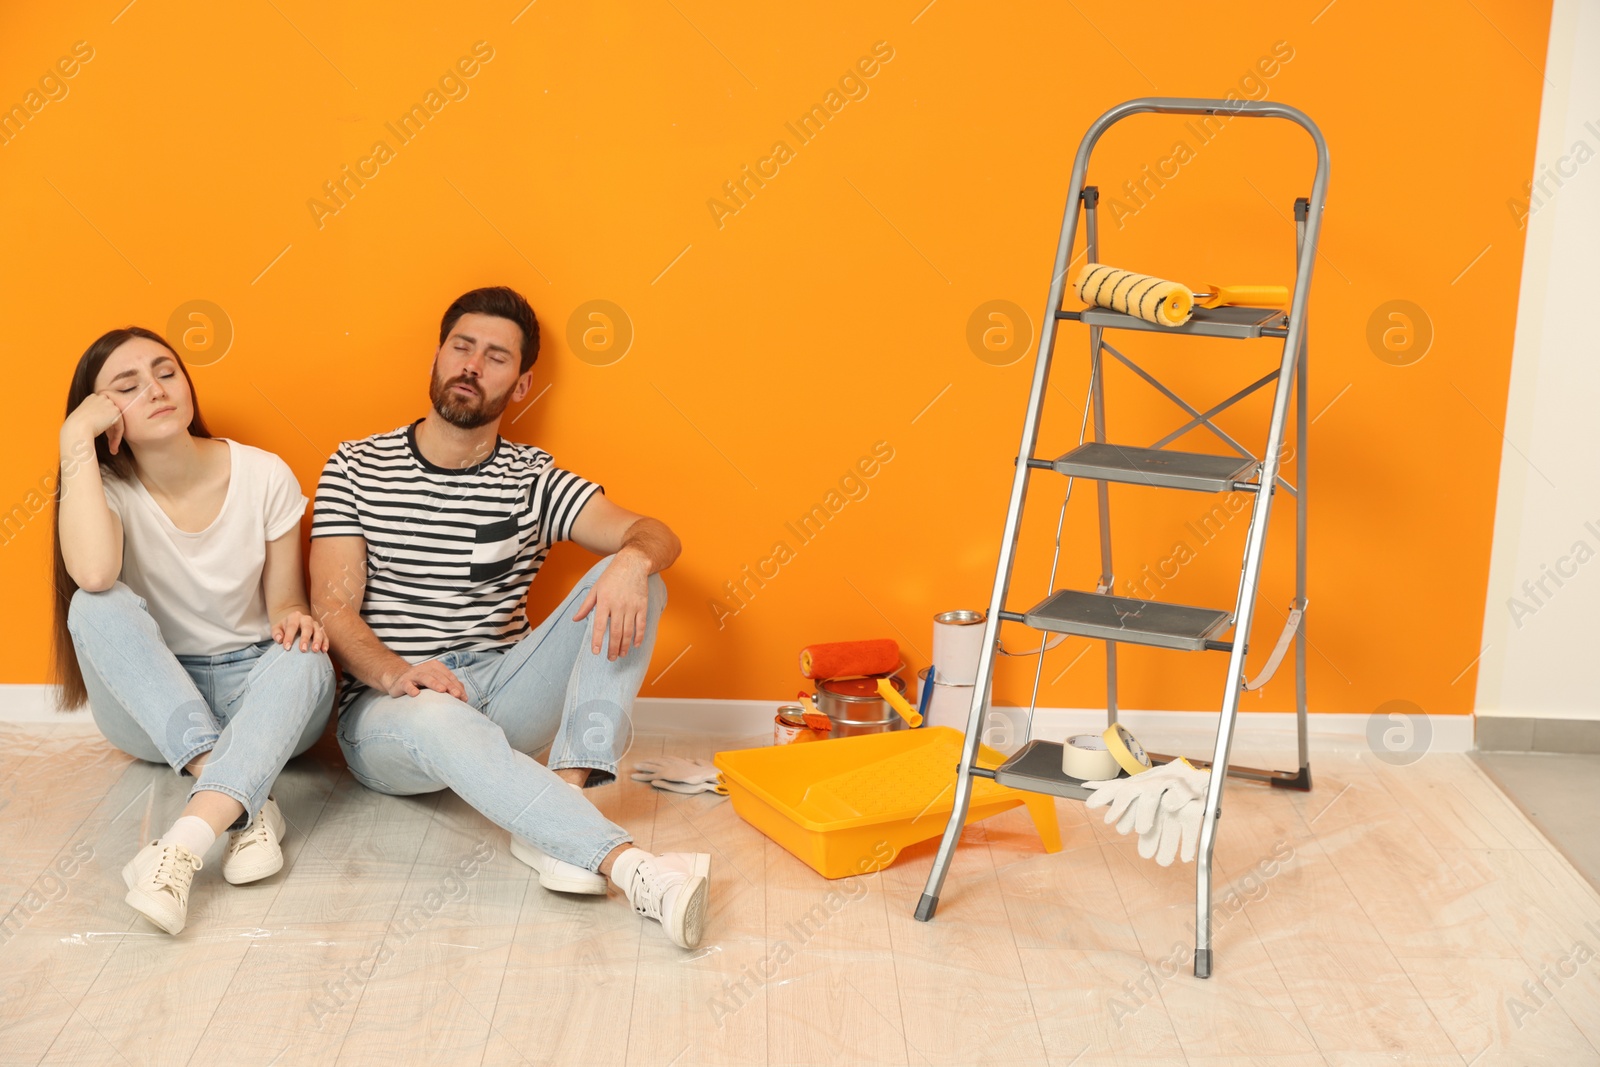 Photo of Tired designers sitting on floor and painting equipment near freshly painted orange wall